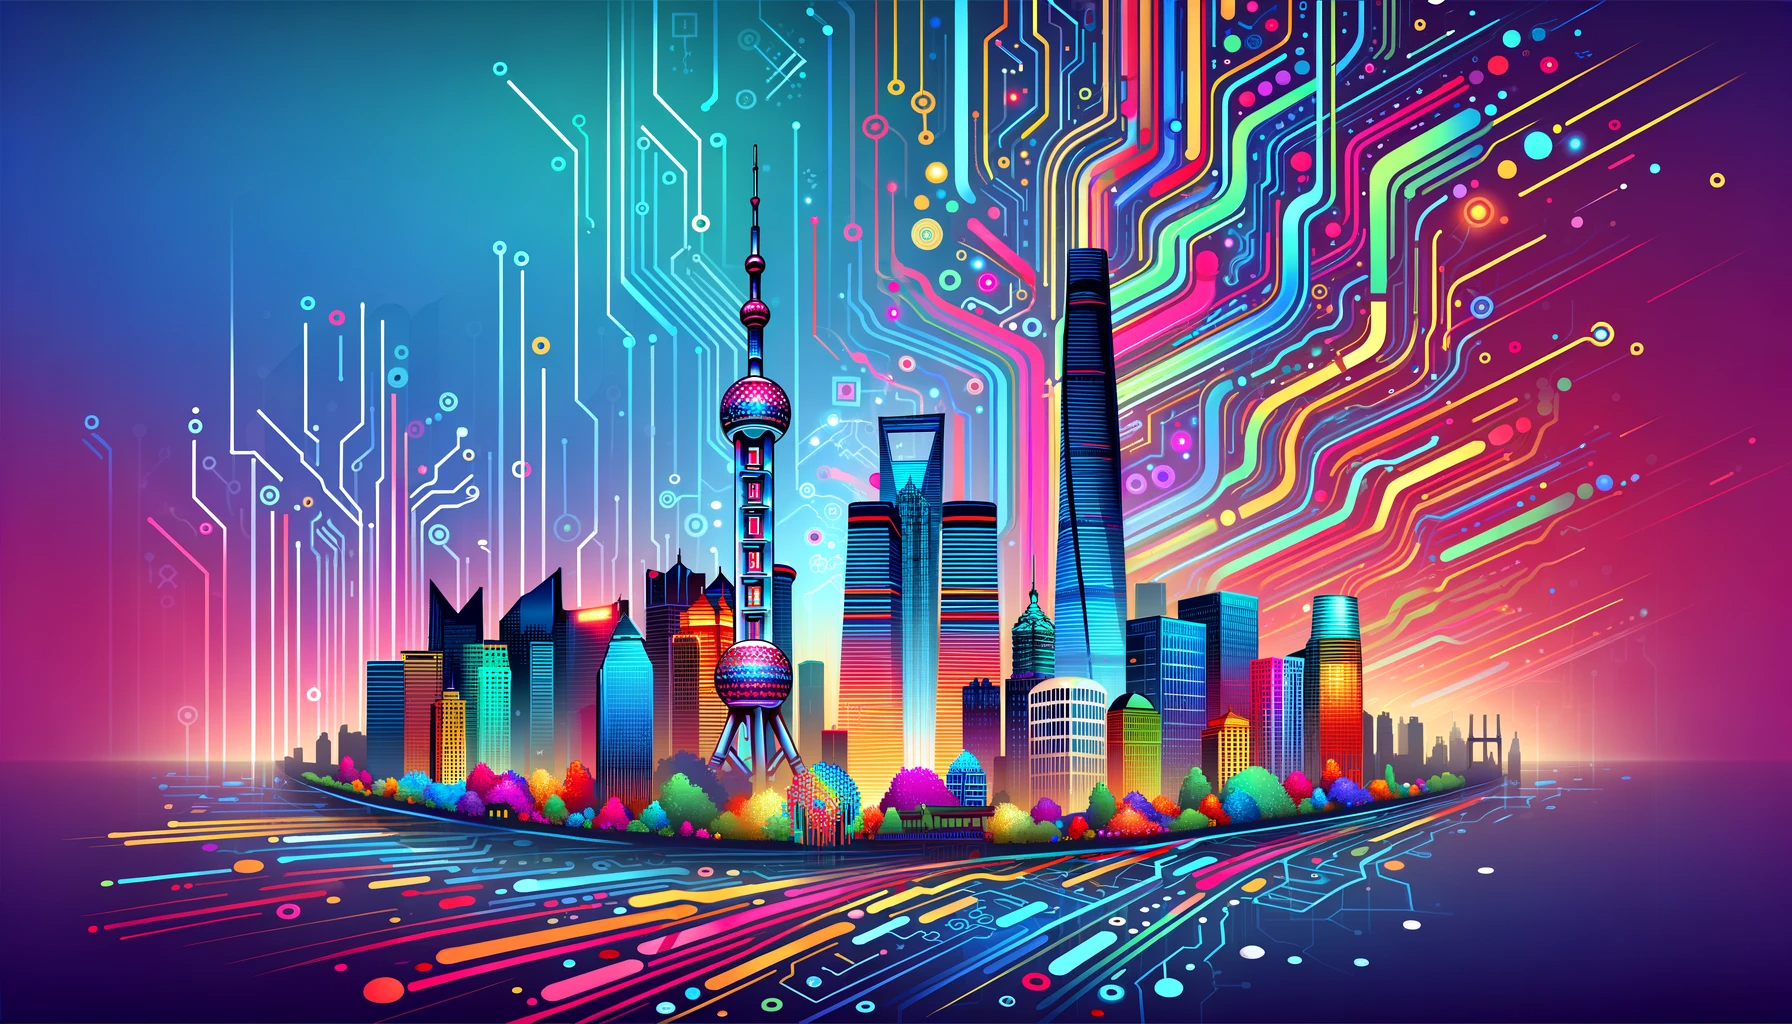 Ant Group forms strategic alliance with Shanghai to support the city’s ambition in artificial intelligence